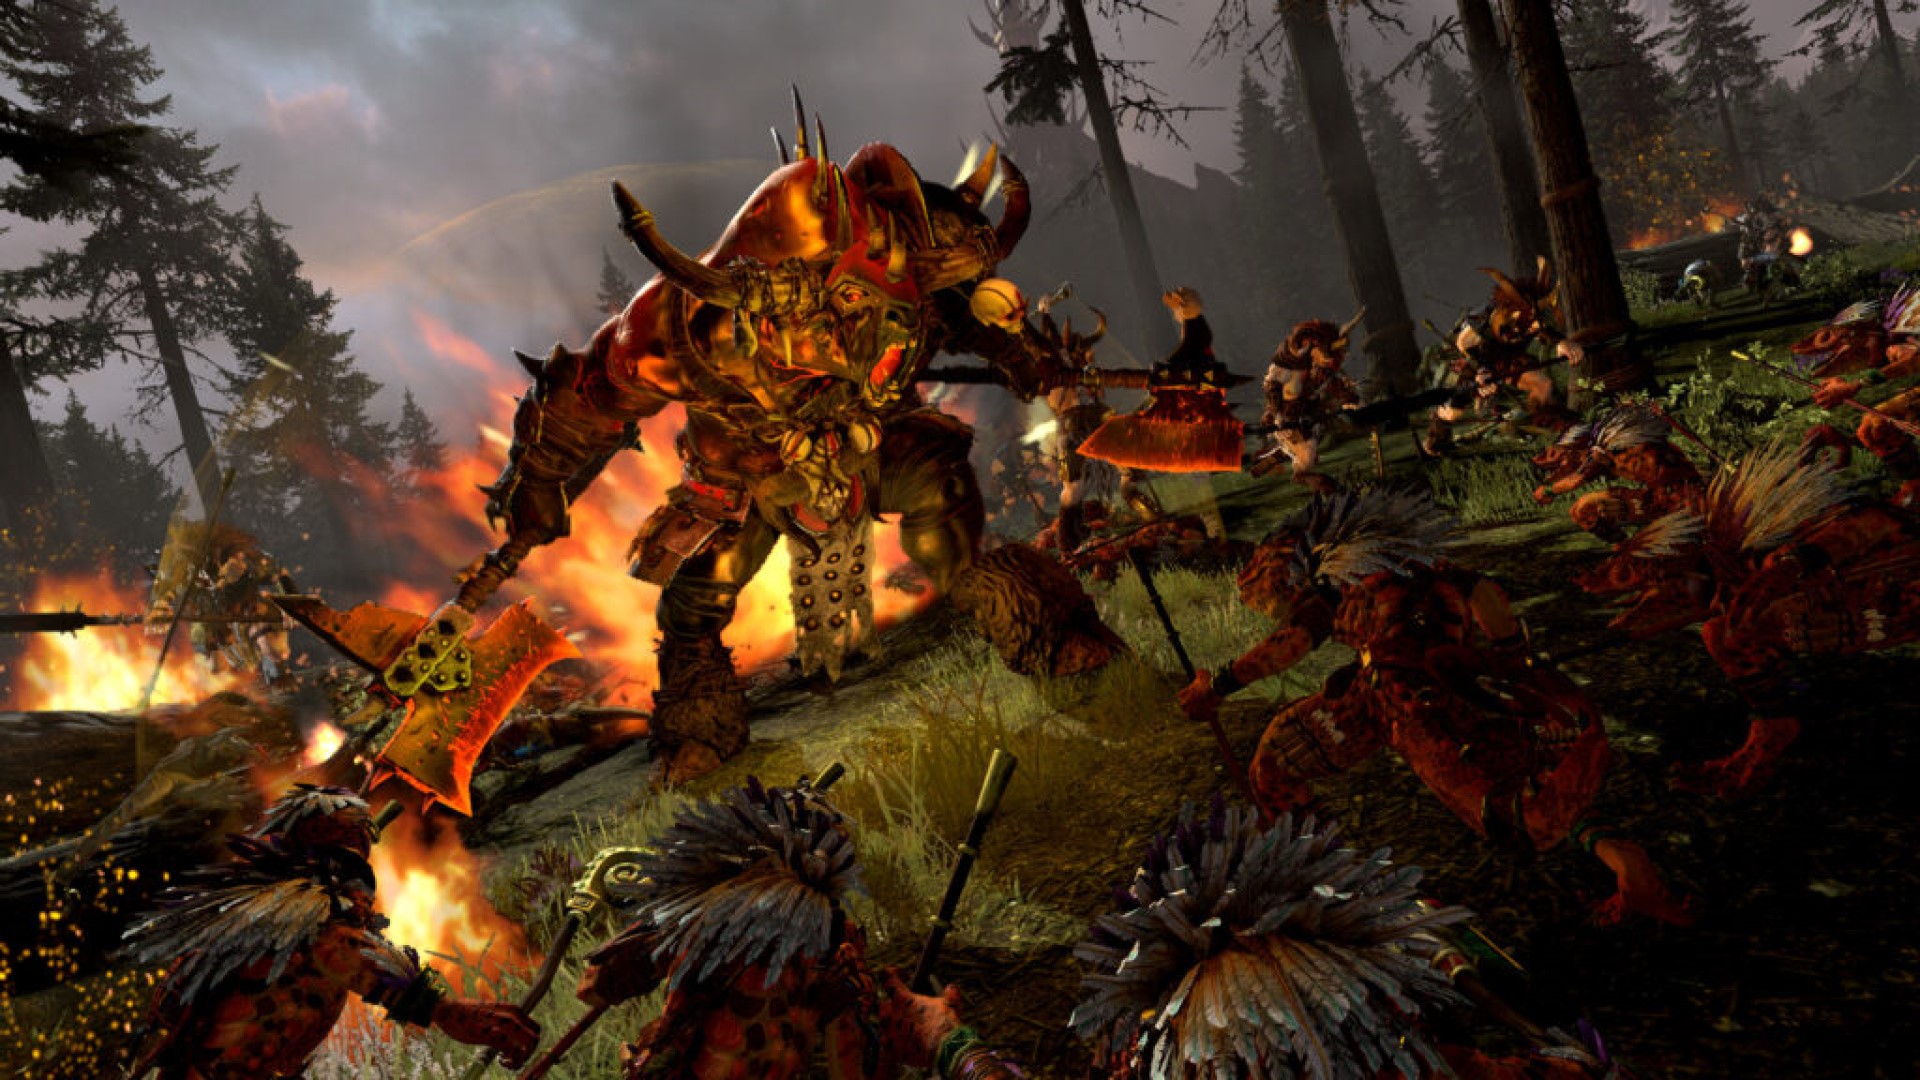 Total War: Warhammer 2’s new Beastmen campaign mechanics have been revealed